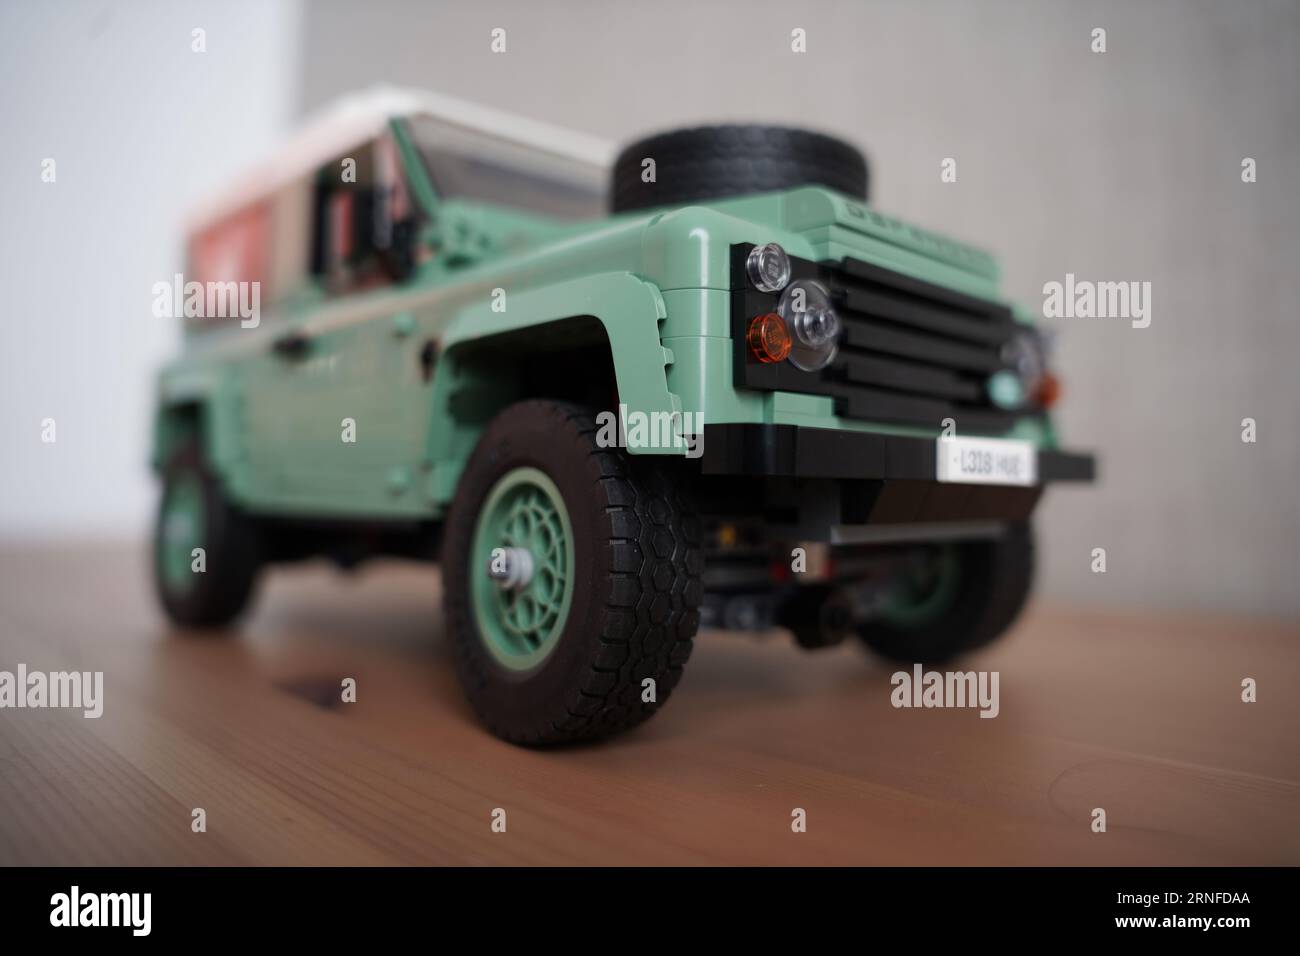 Lego Defender,Land Rover Classic Defender 90. Green car lego with details. Stock Photo